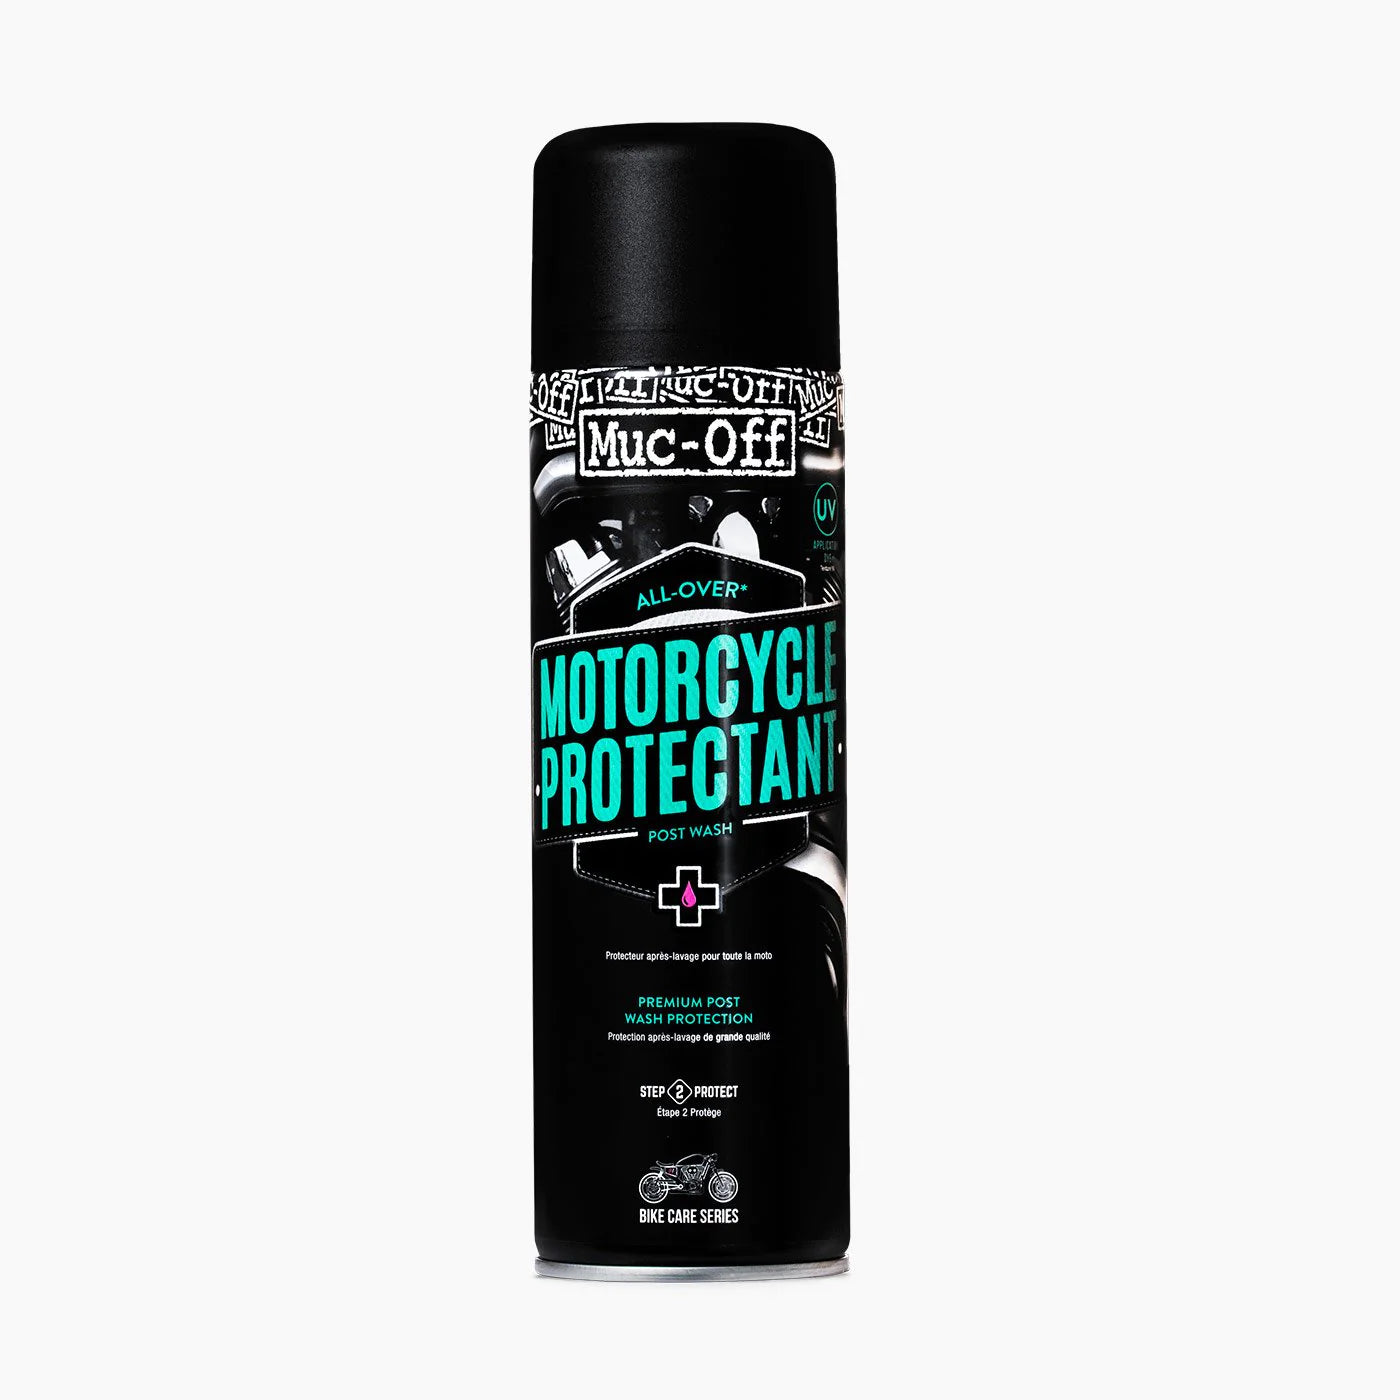 Muc-off Motorcycle Protectant 500ml spray bottle on white background